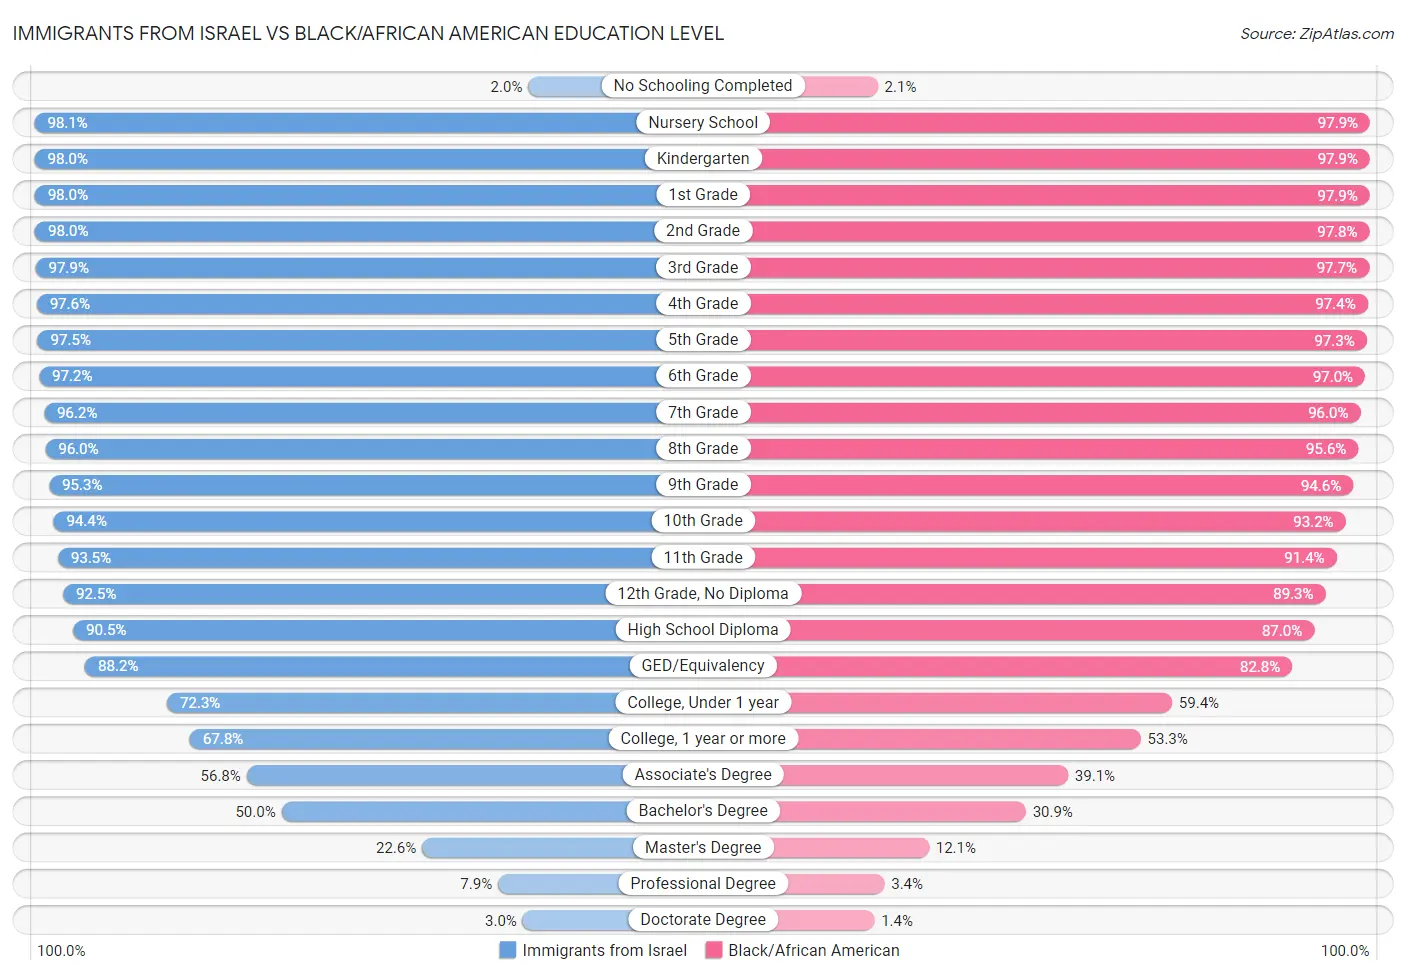 Immigrants from Israel vs Black/African American Education Level